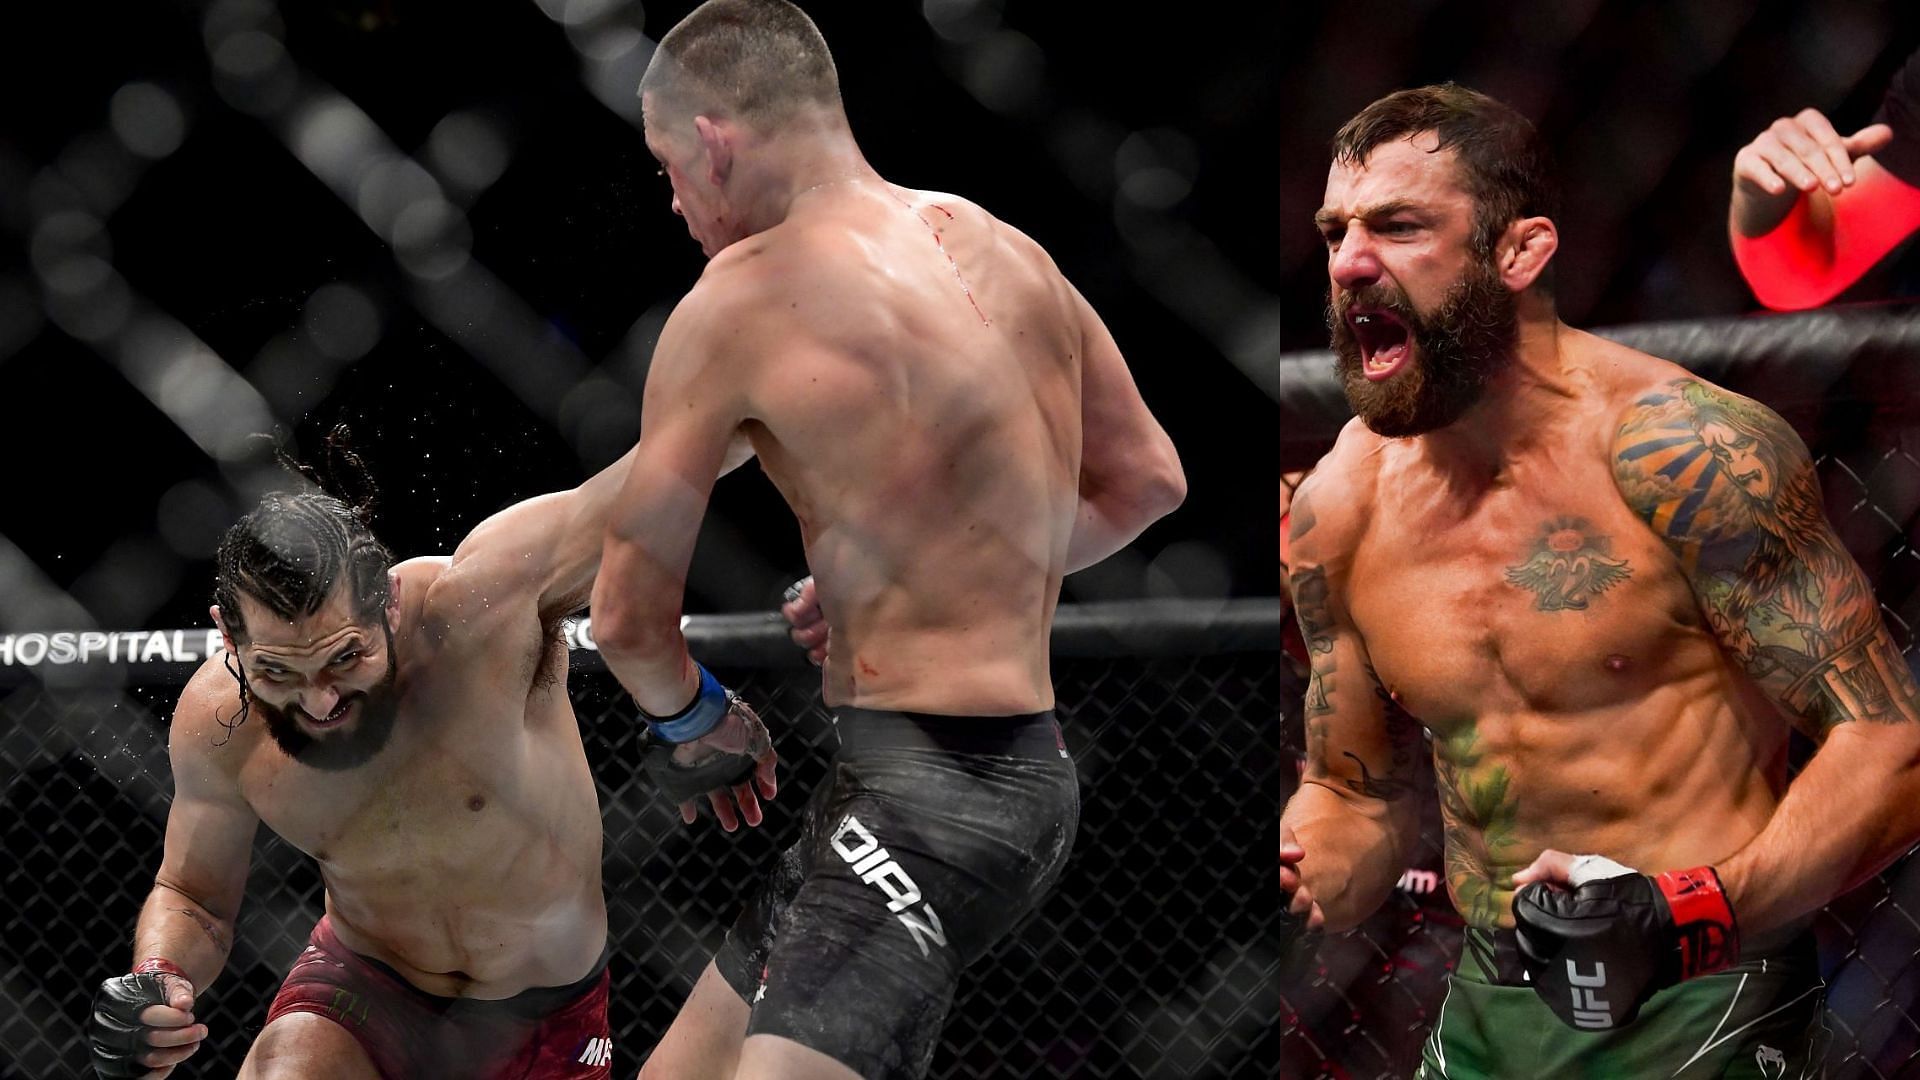 Jorge Masvidal vs. Nate Diaz (Left) and Michael Chiesa (Right) (Images courtesy of Getty)